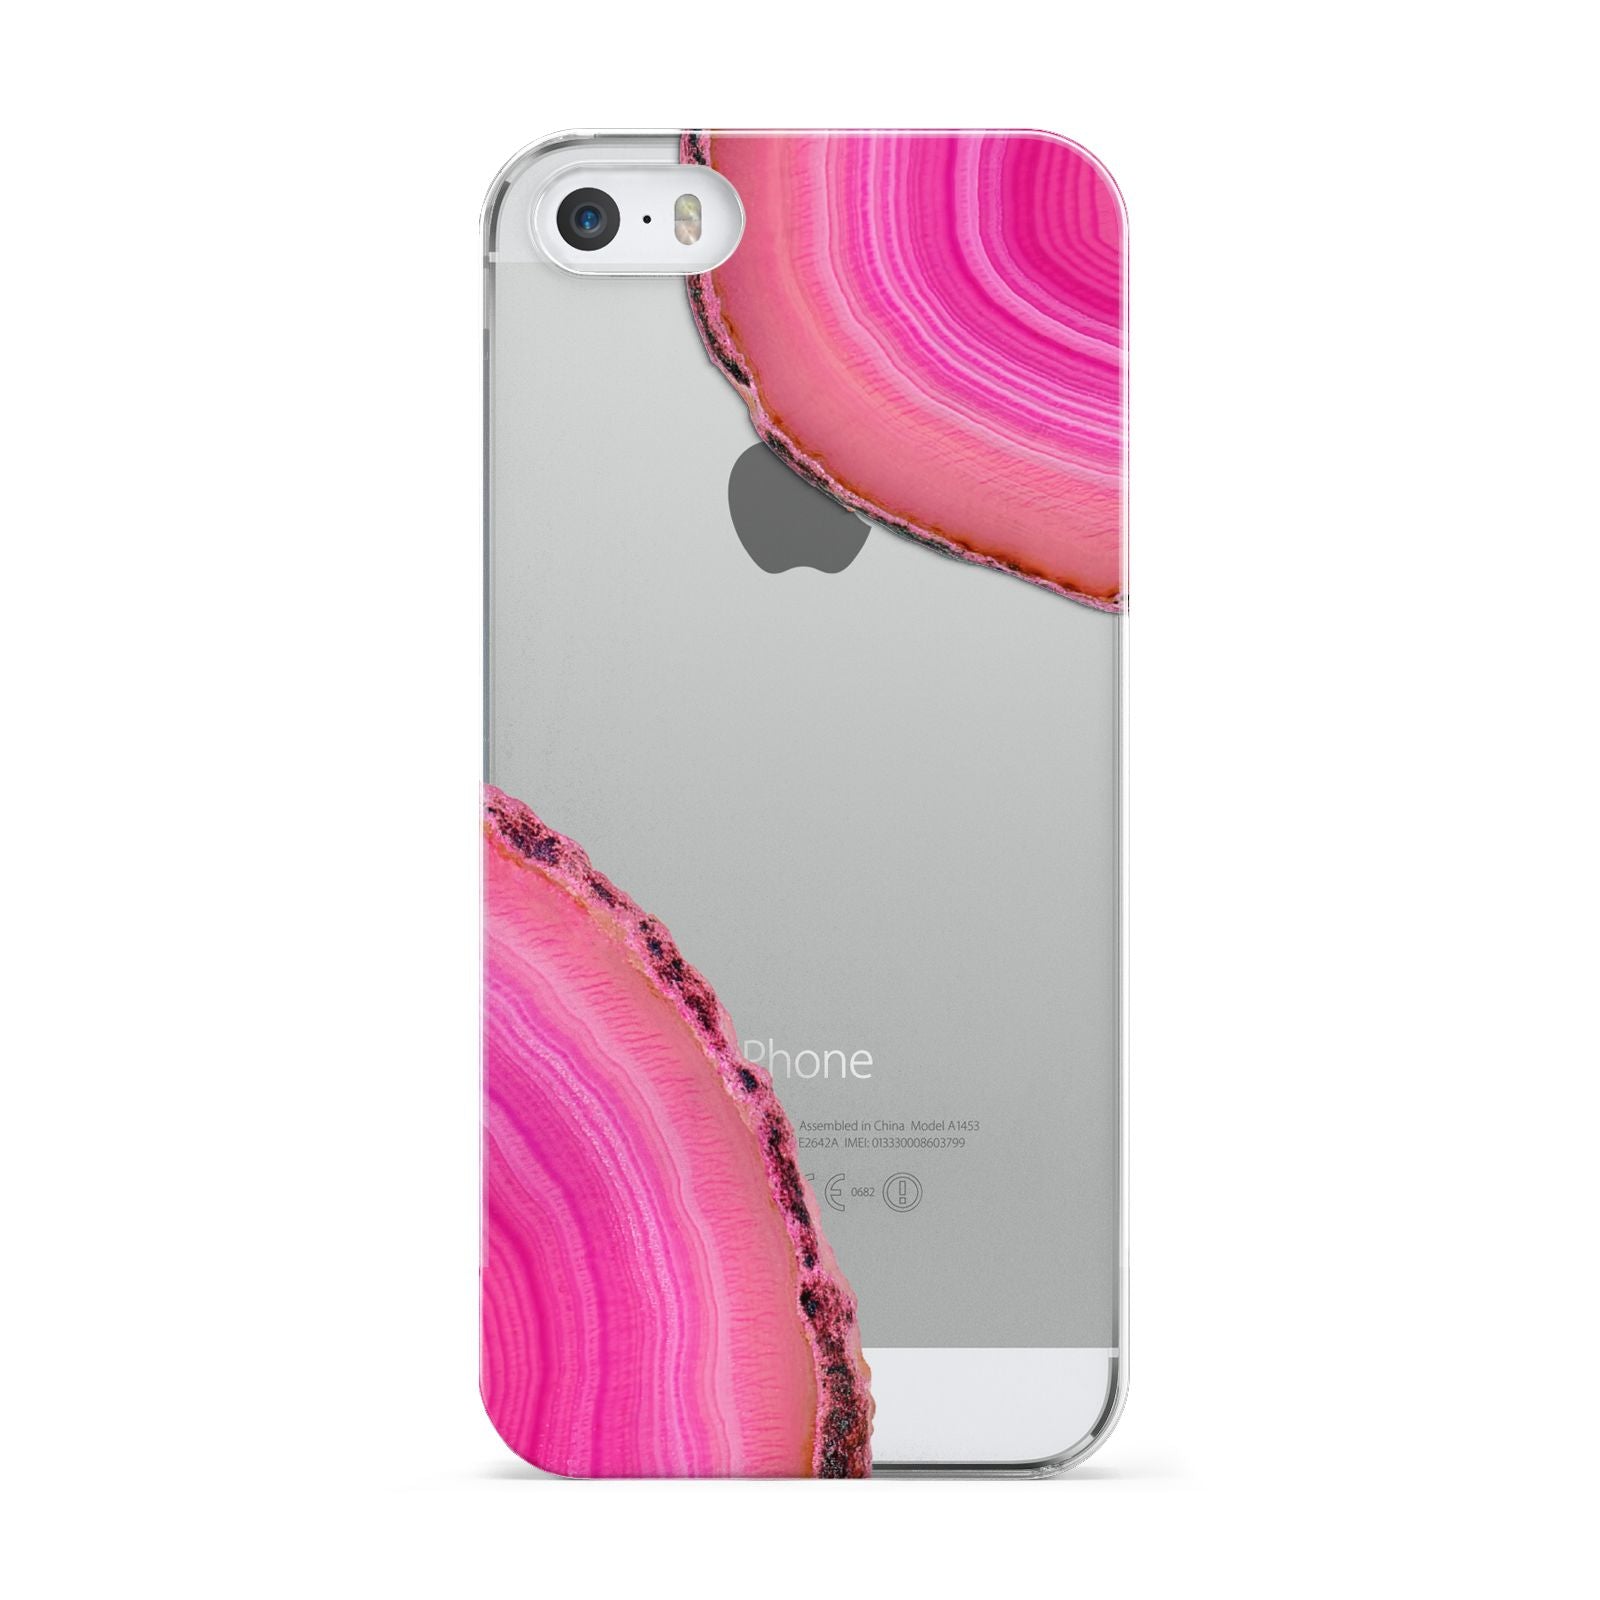 Agate Bright Pink Apple iPhone 5 Case